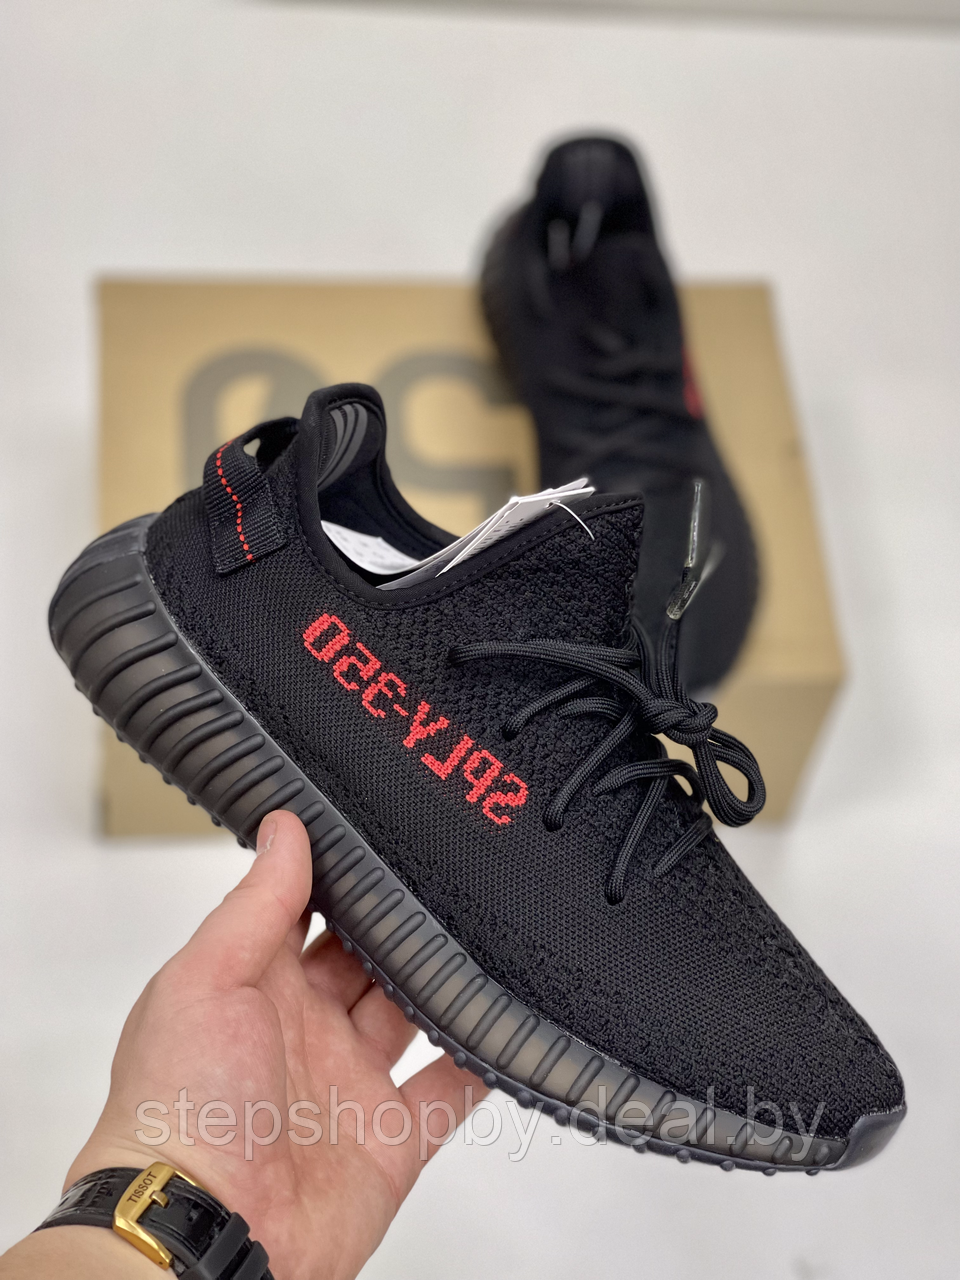 Adidas Yeezy Boost 350 V2 Core Black Red 'Bred' размер 40 - фото 1 - id-p177722957